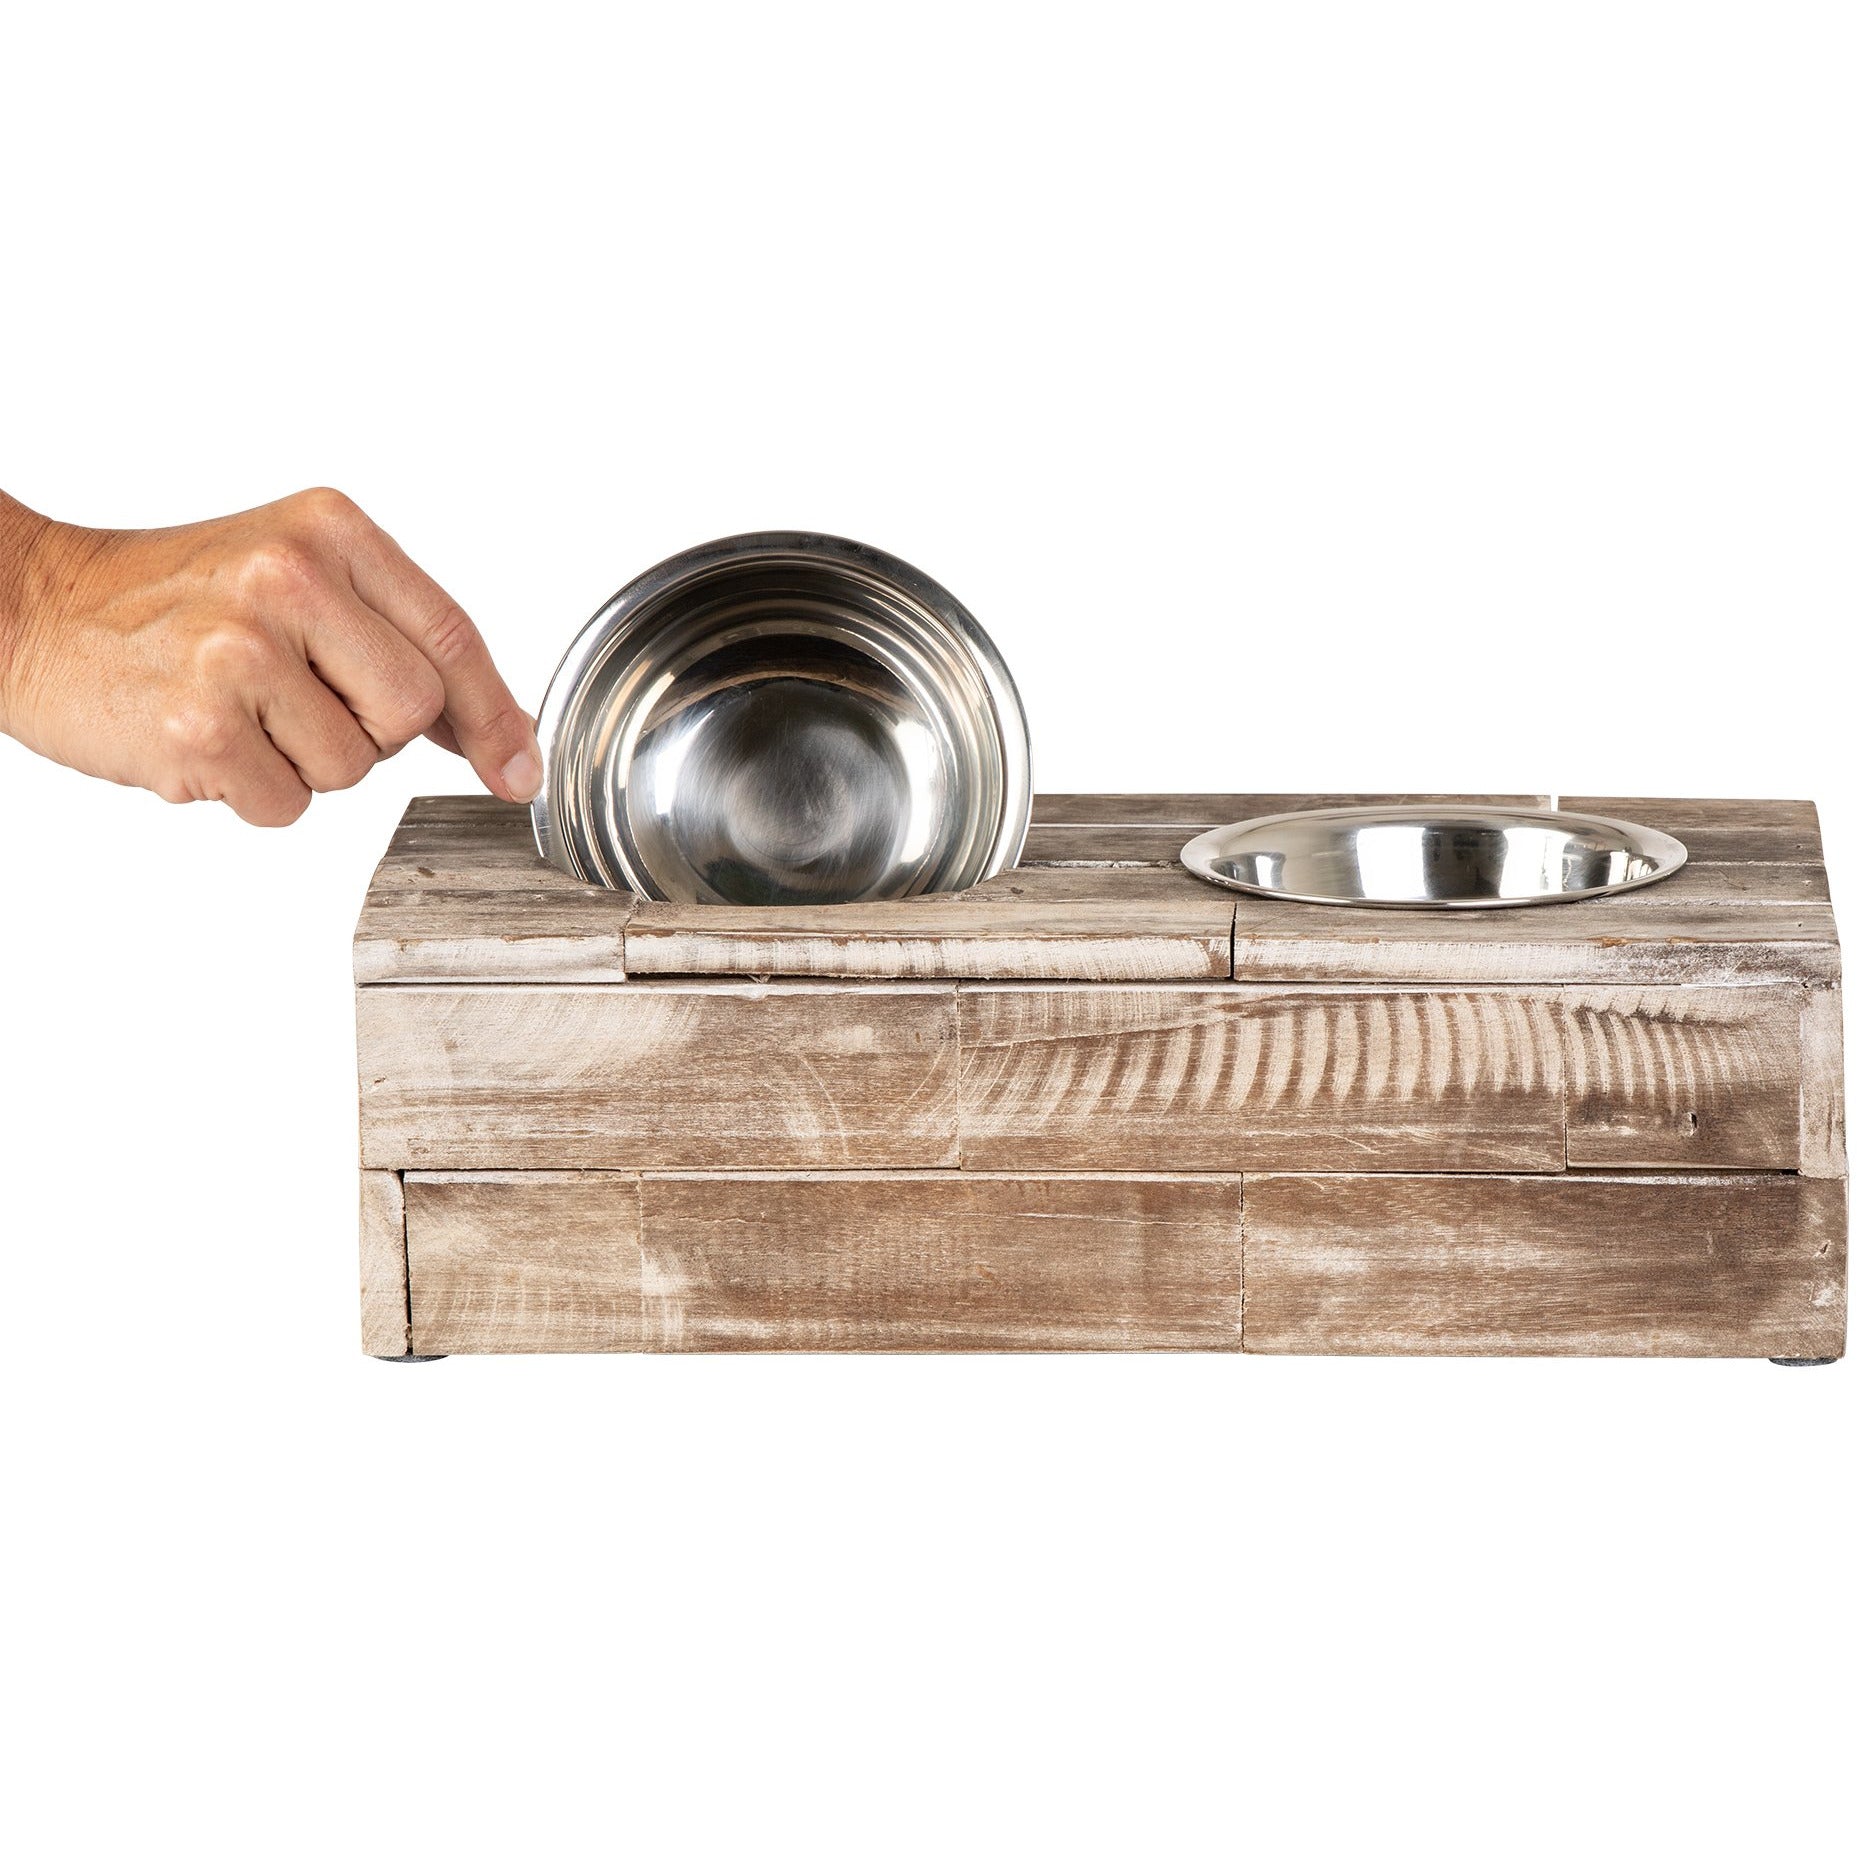 Huntley Elevated Pet Stainless Steel Double Bowl Feeder